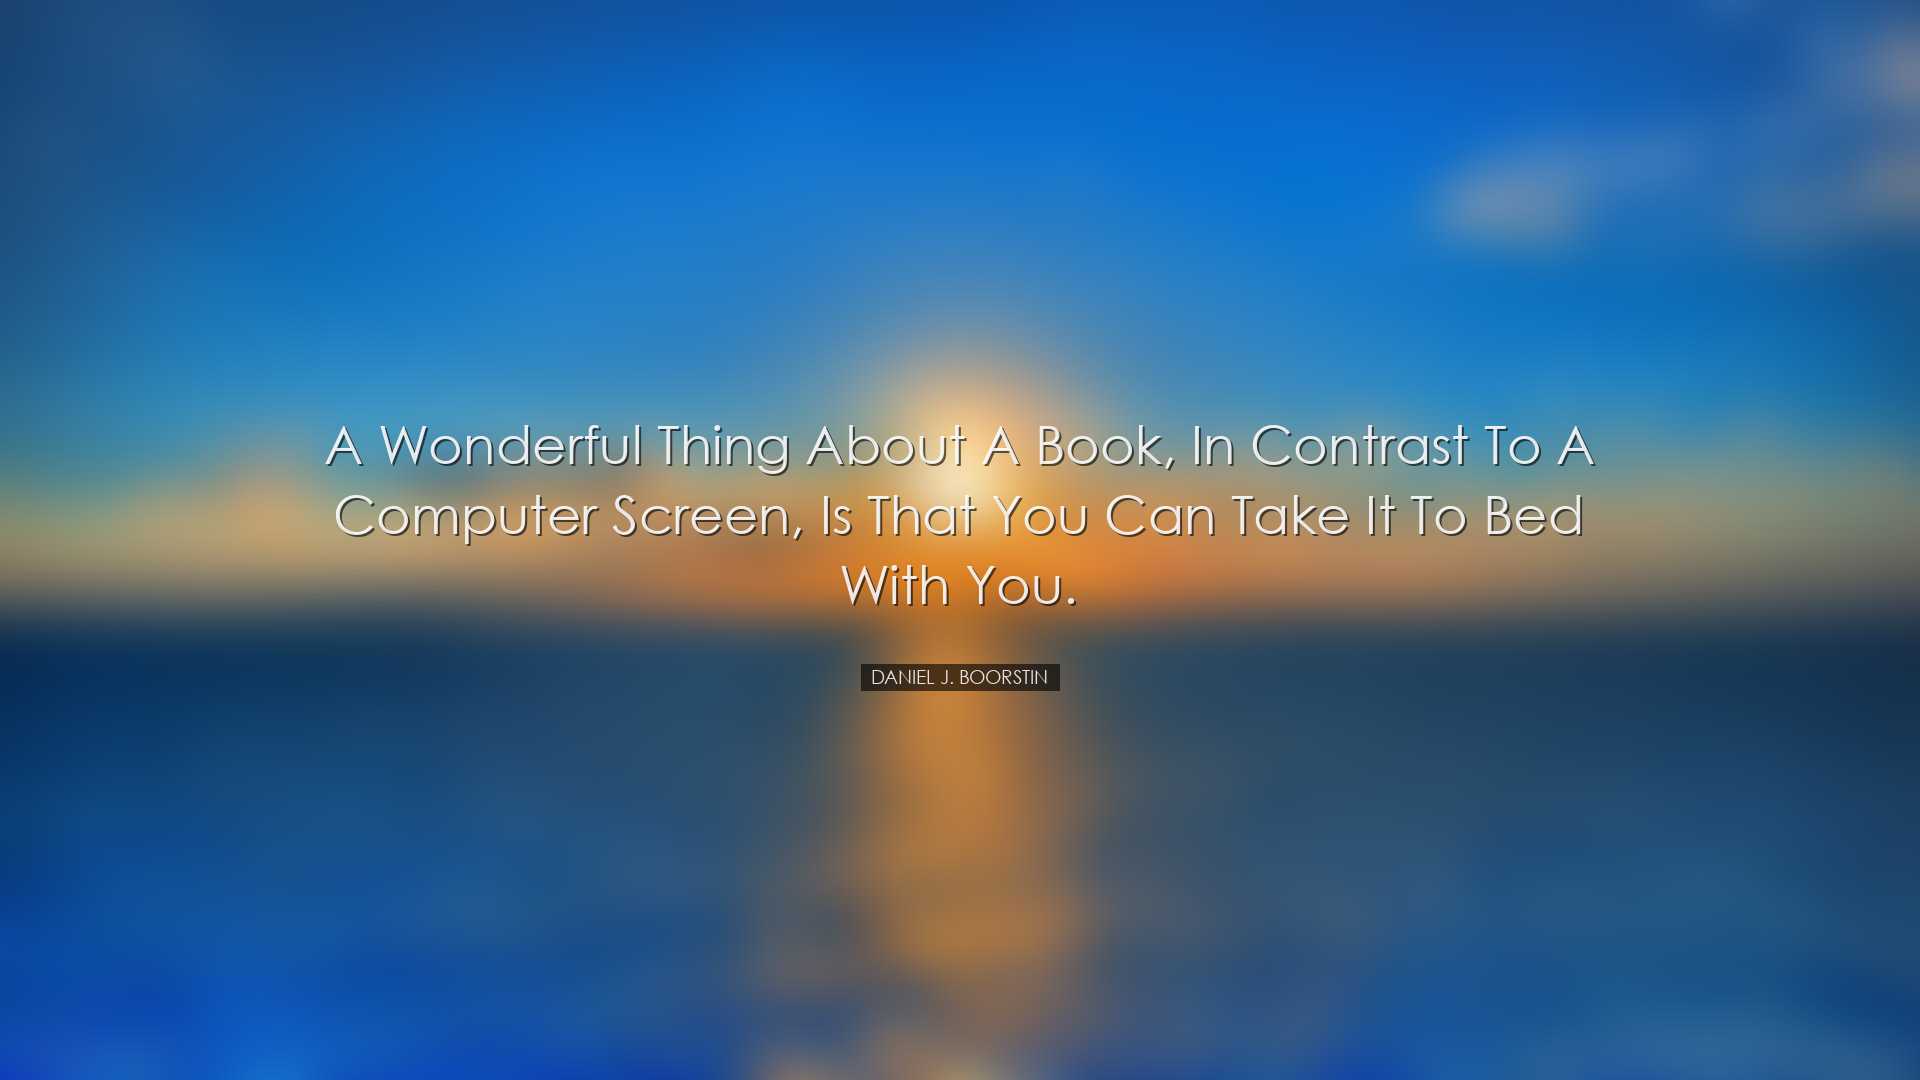 A wonderful thing about a book, in contrast to a computer screen,